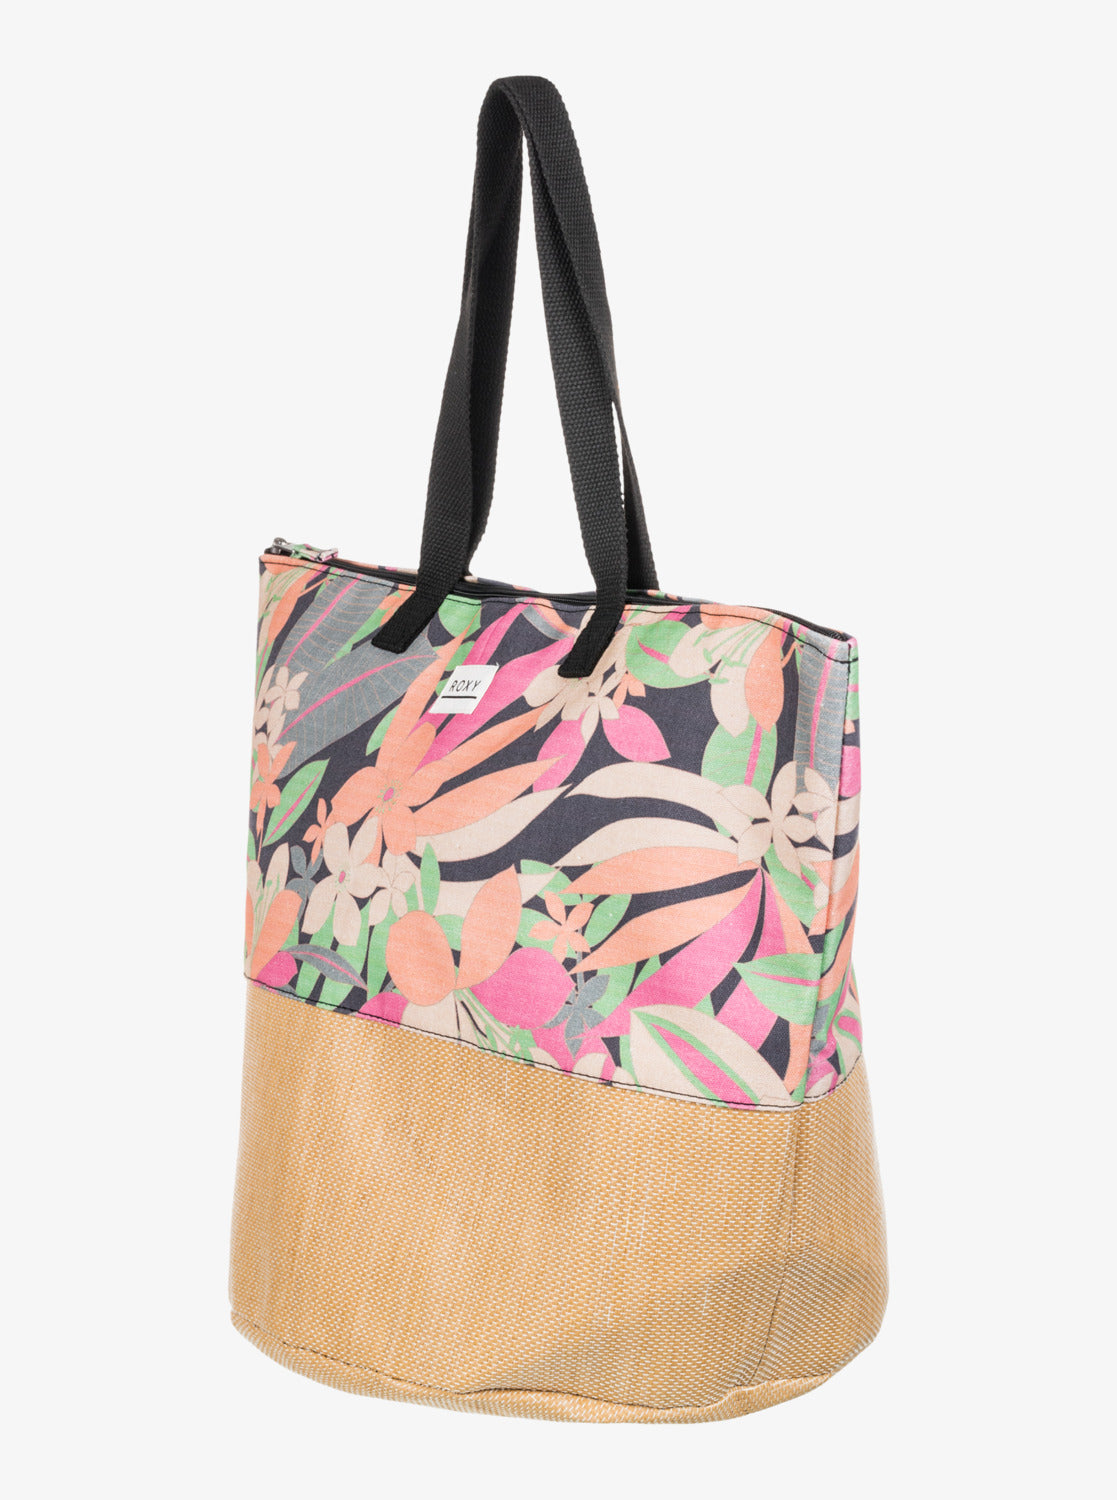 Roxy Waikiki Life Tote Bag in Anthracite Palm Song